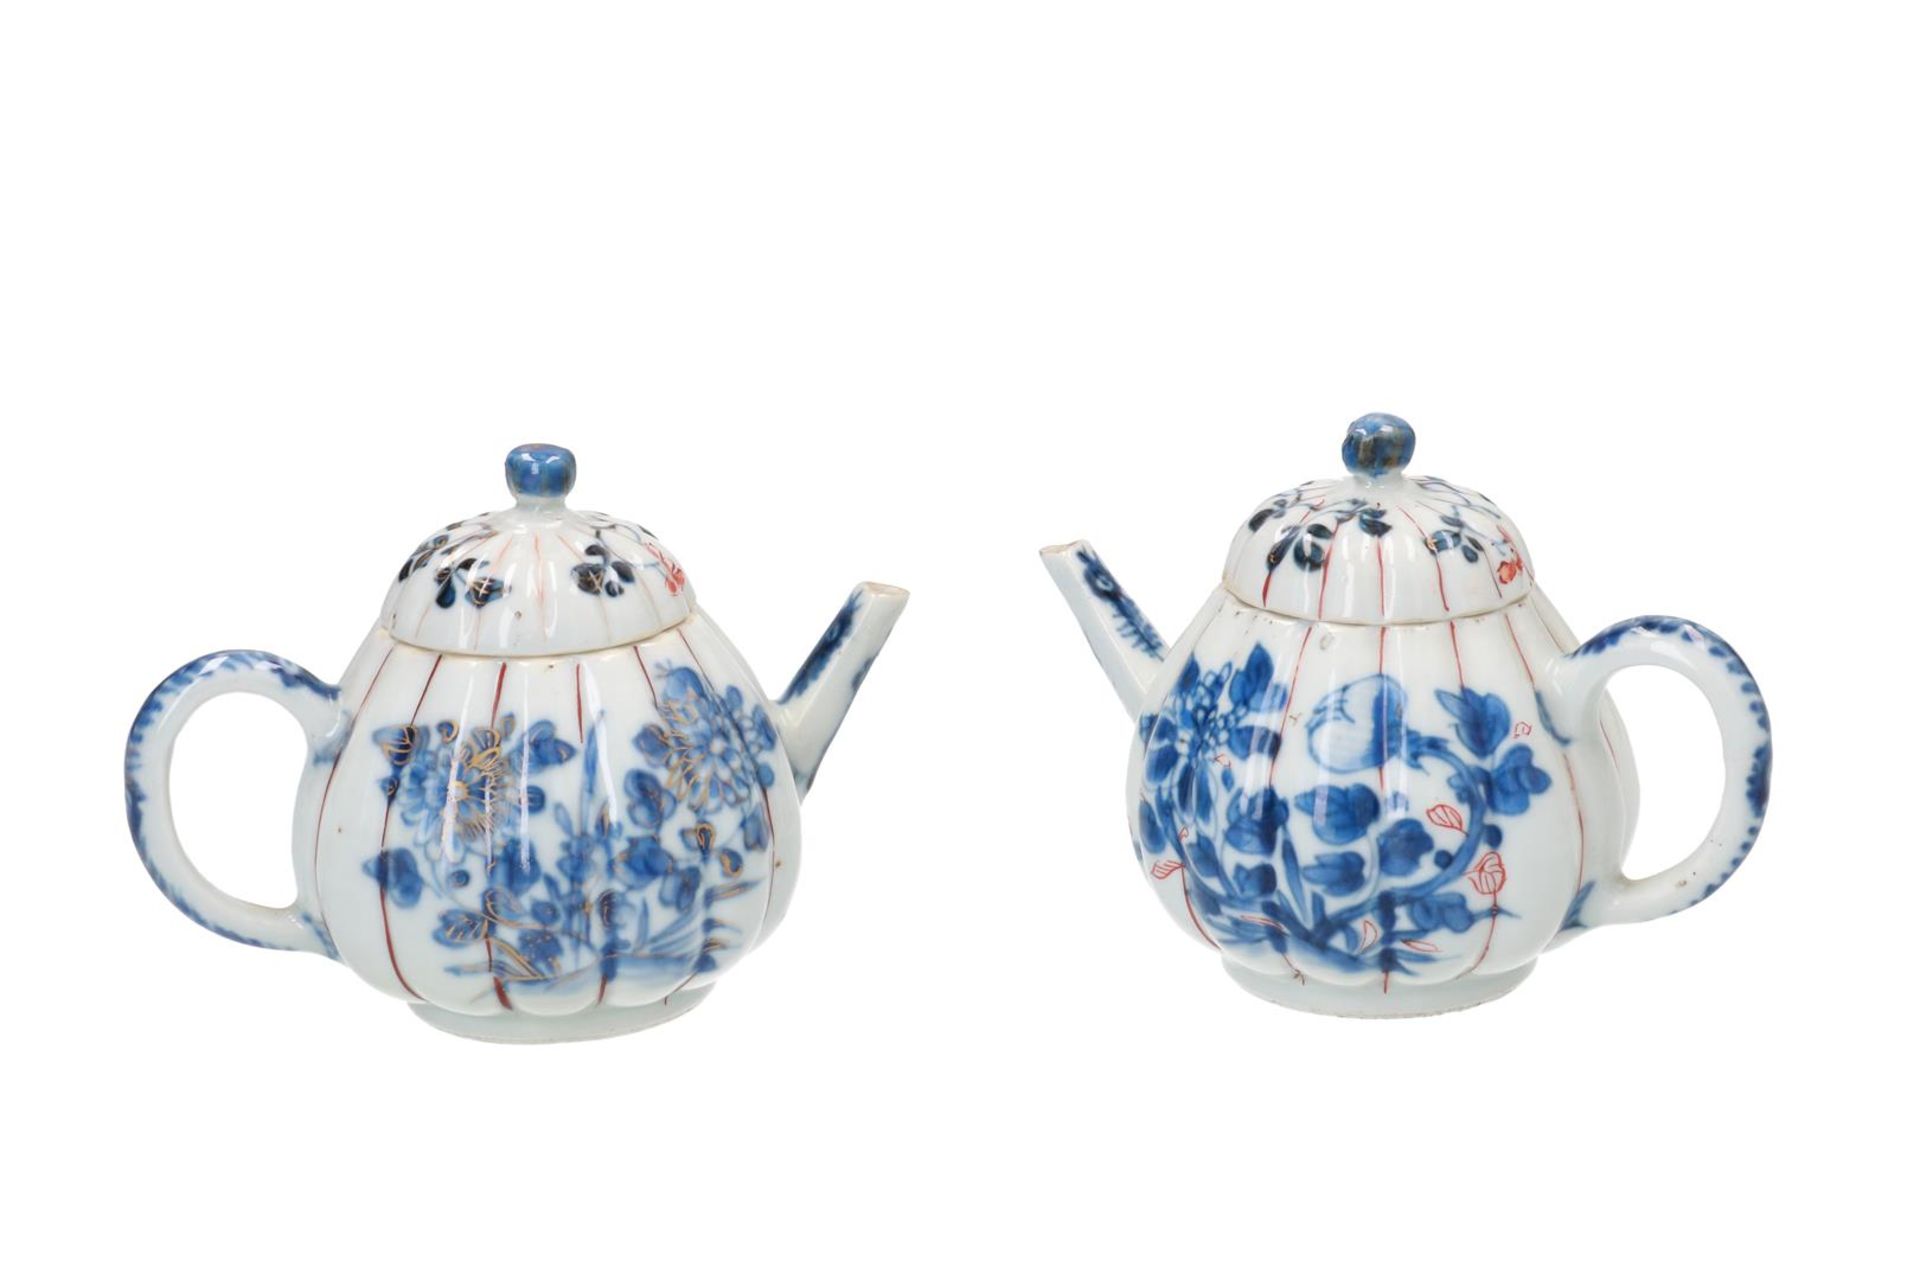 A pair of Imari porcelain teapots with lobbed belly and floral decor. Unmarked. China, 18th century.